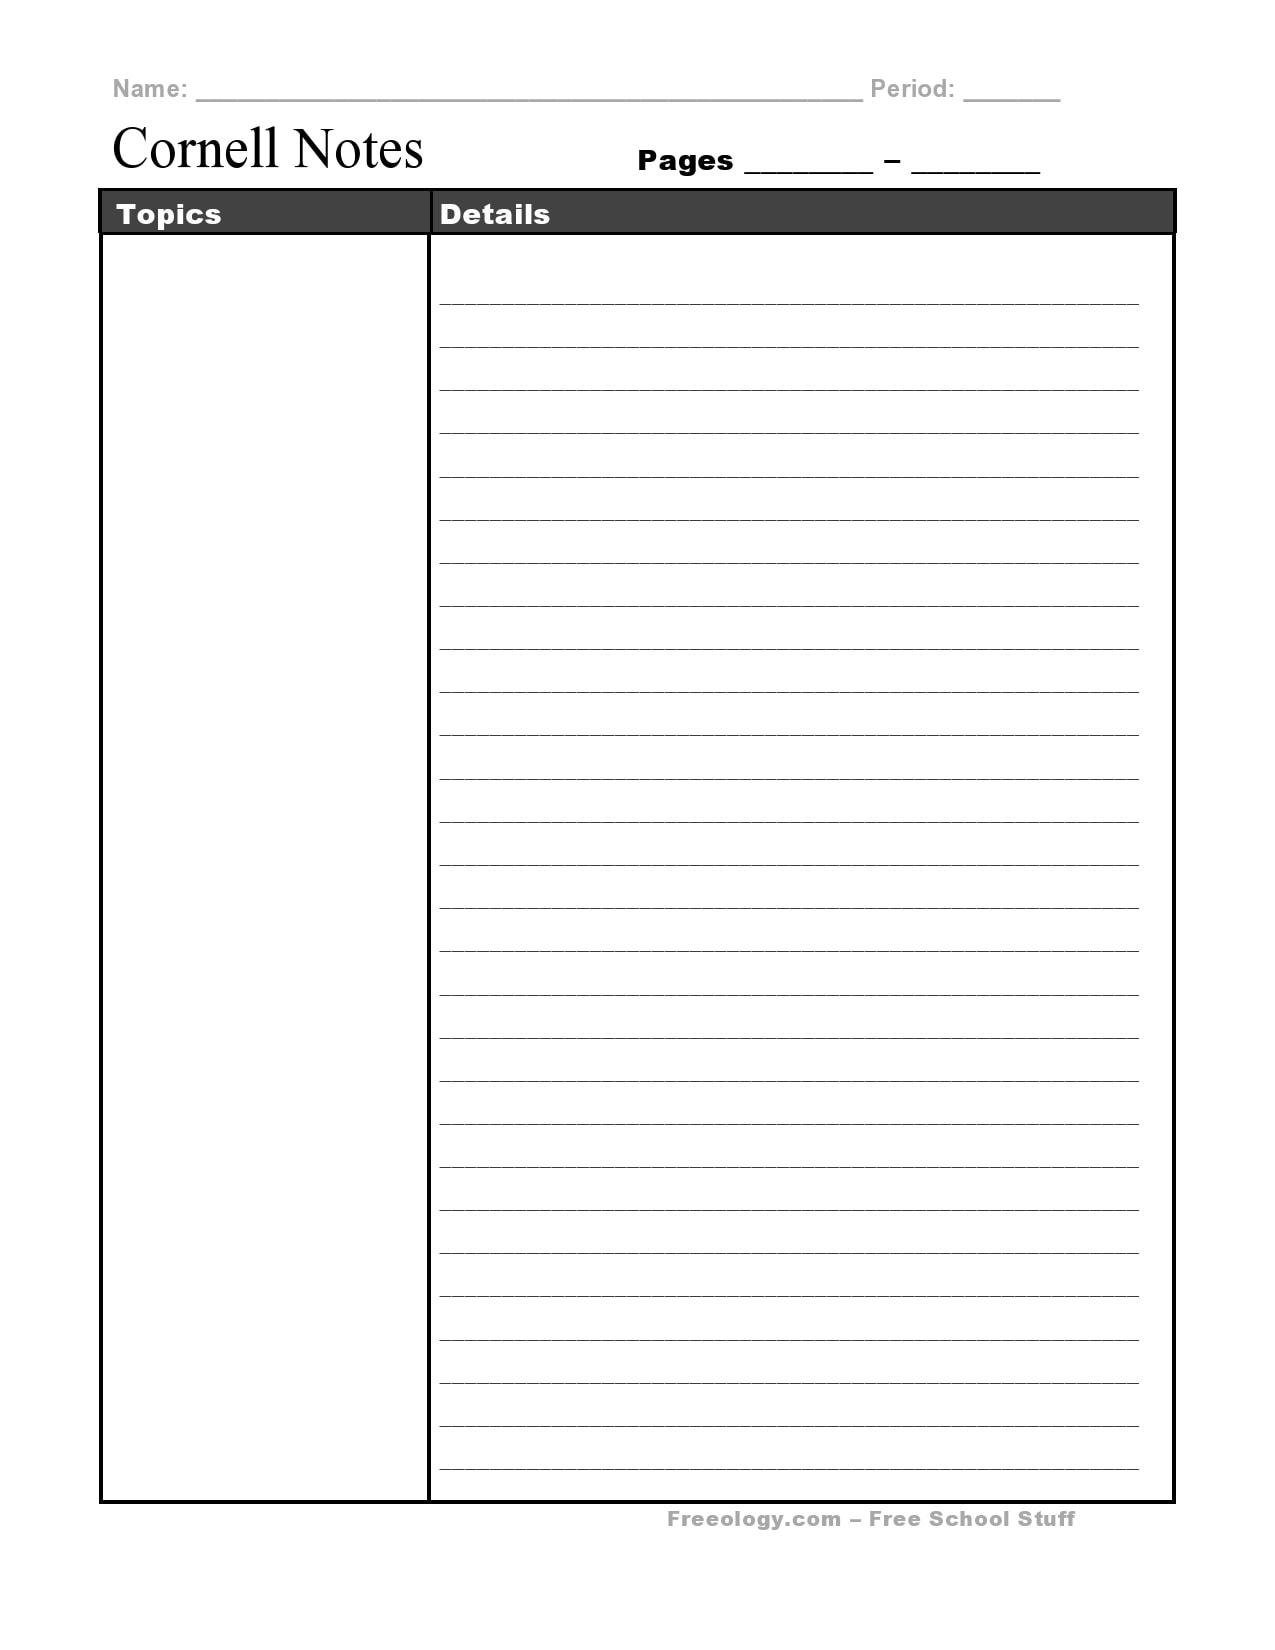 22 Printable Cornell Notes Templates [Free] - TemplateArchive Intended For Best Note Taking Template